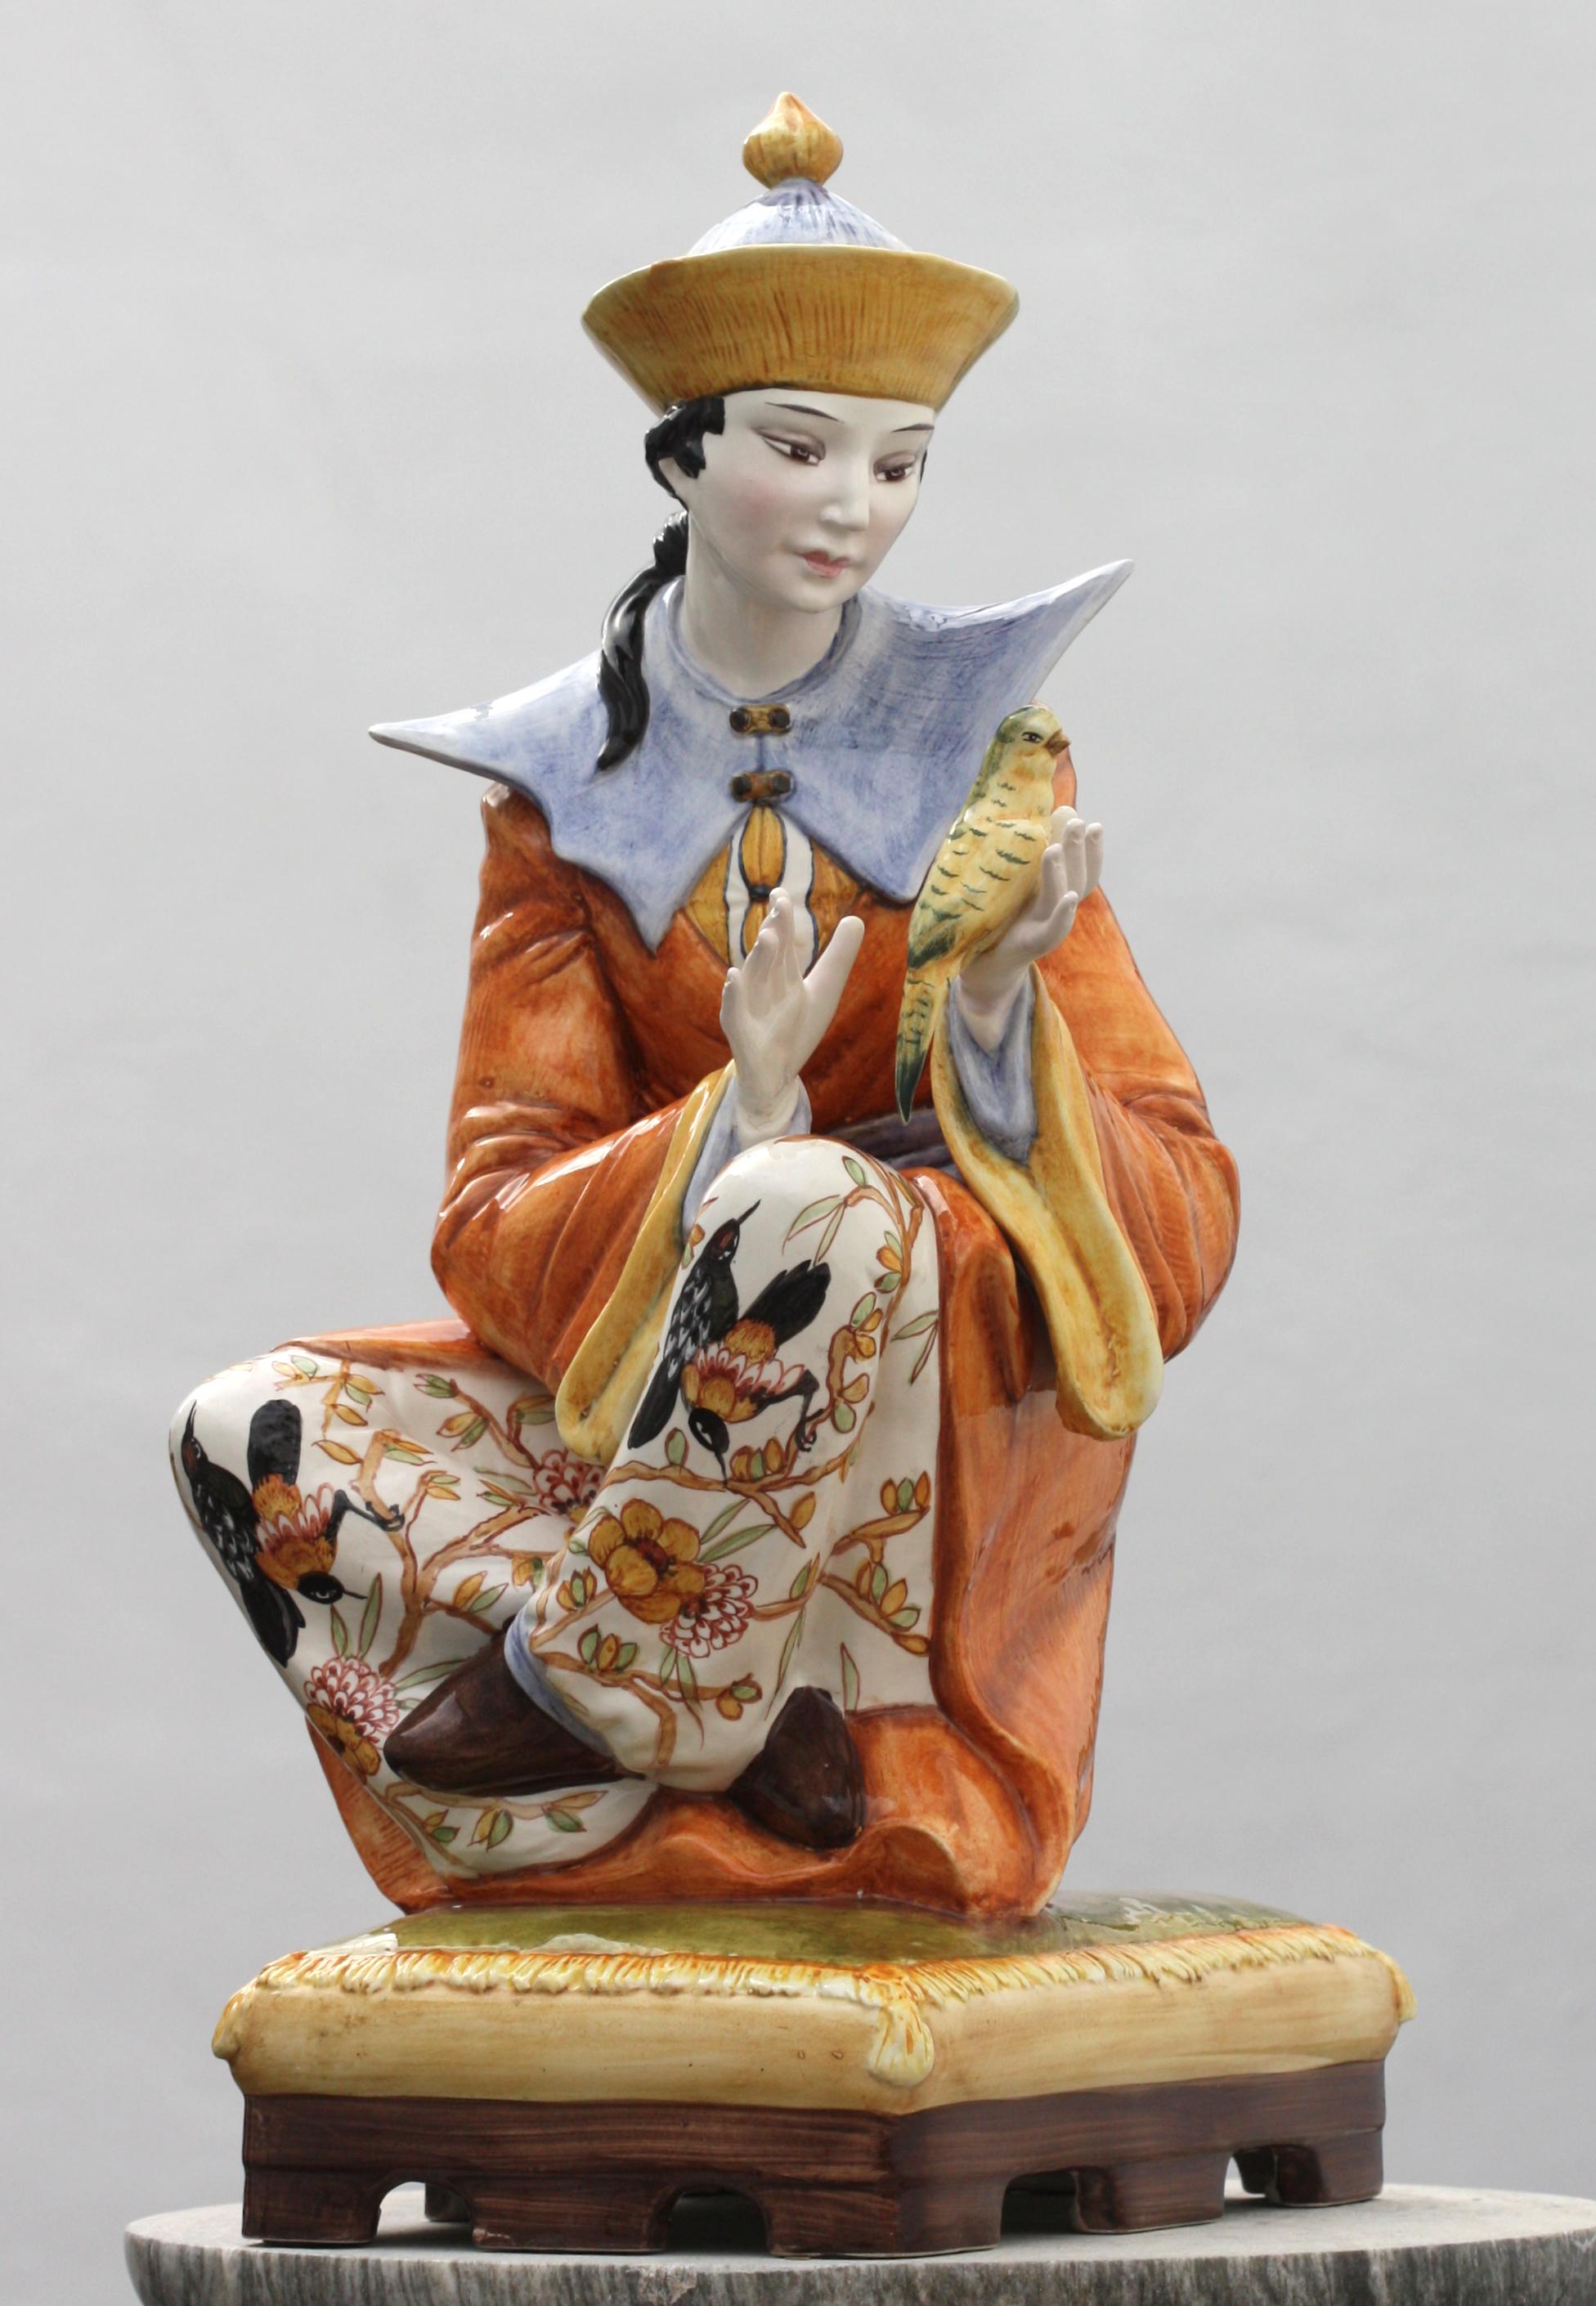 Italian Majolica Mandarin
Colorfully painted depicting a young Mandarin seated upon a cushion, formerly mounted as a lamp. Height 26 in., Width 12 in., Depth 14 in.